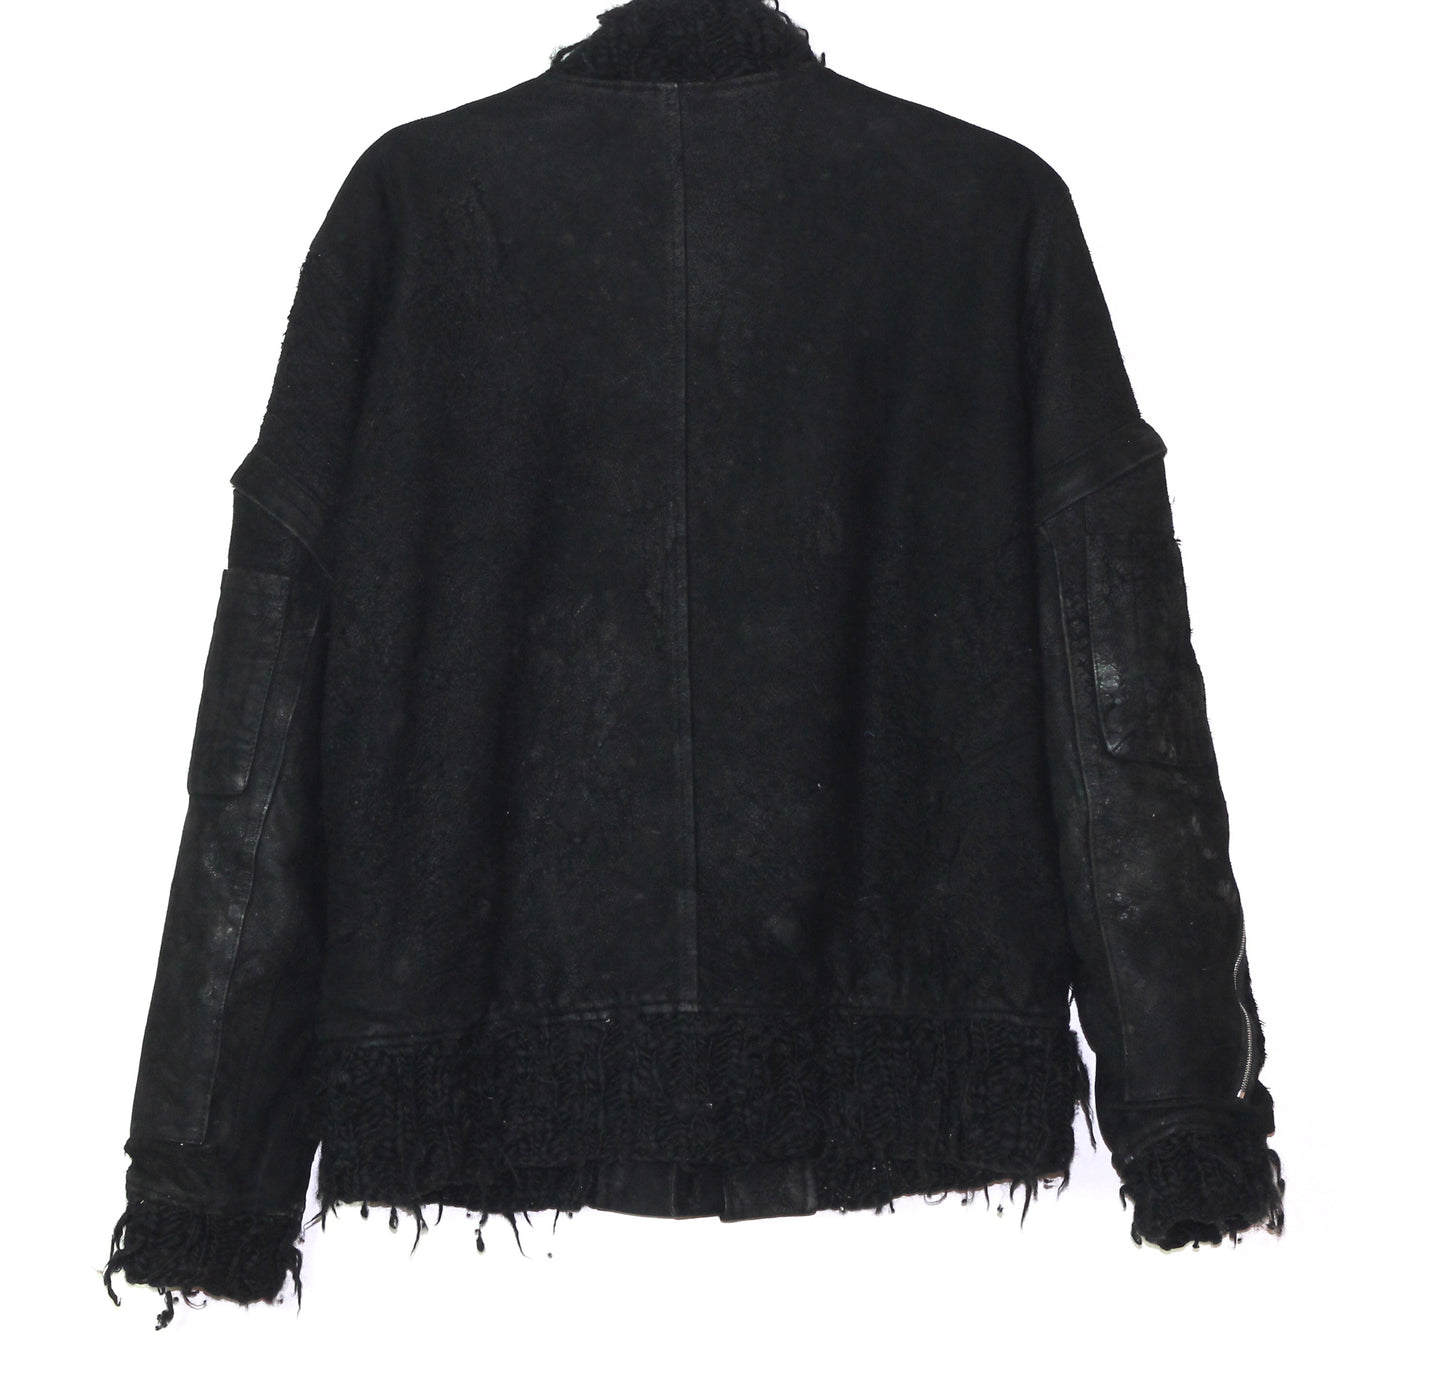 INQUIRE Undercoverism distressed and blistered lambskin bomber A/W04 "But Beautiful" Large Not For Sale